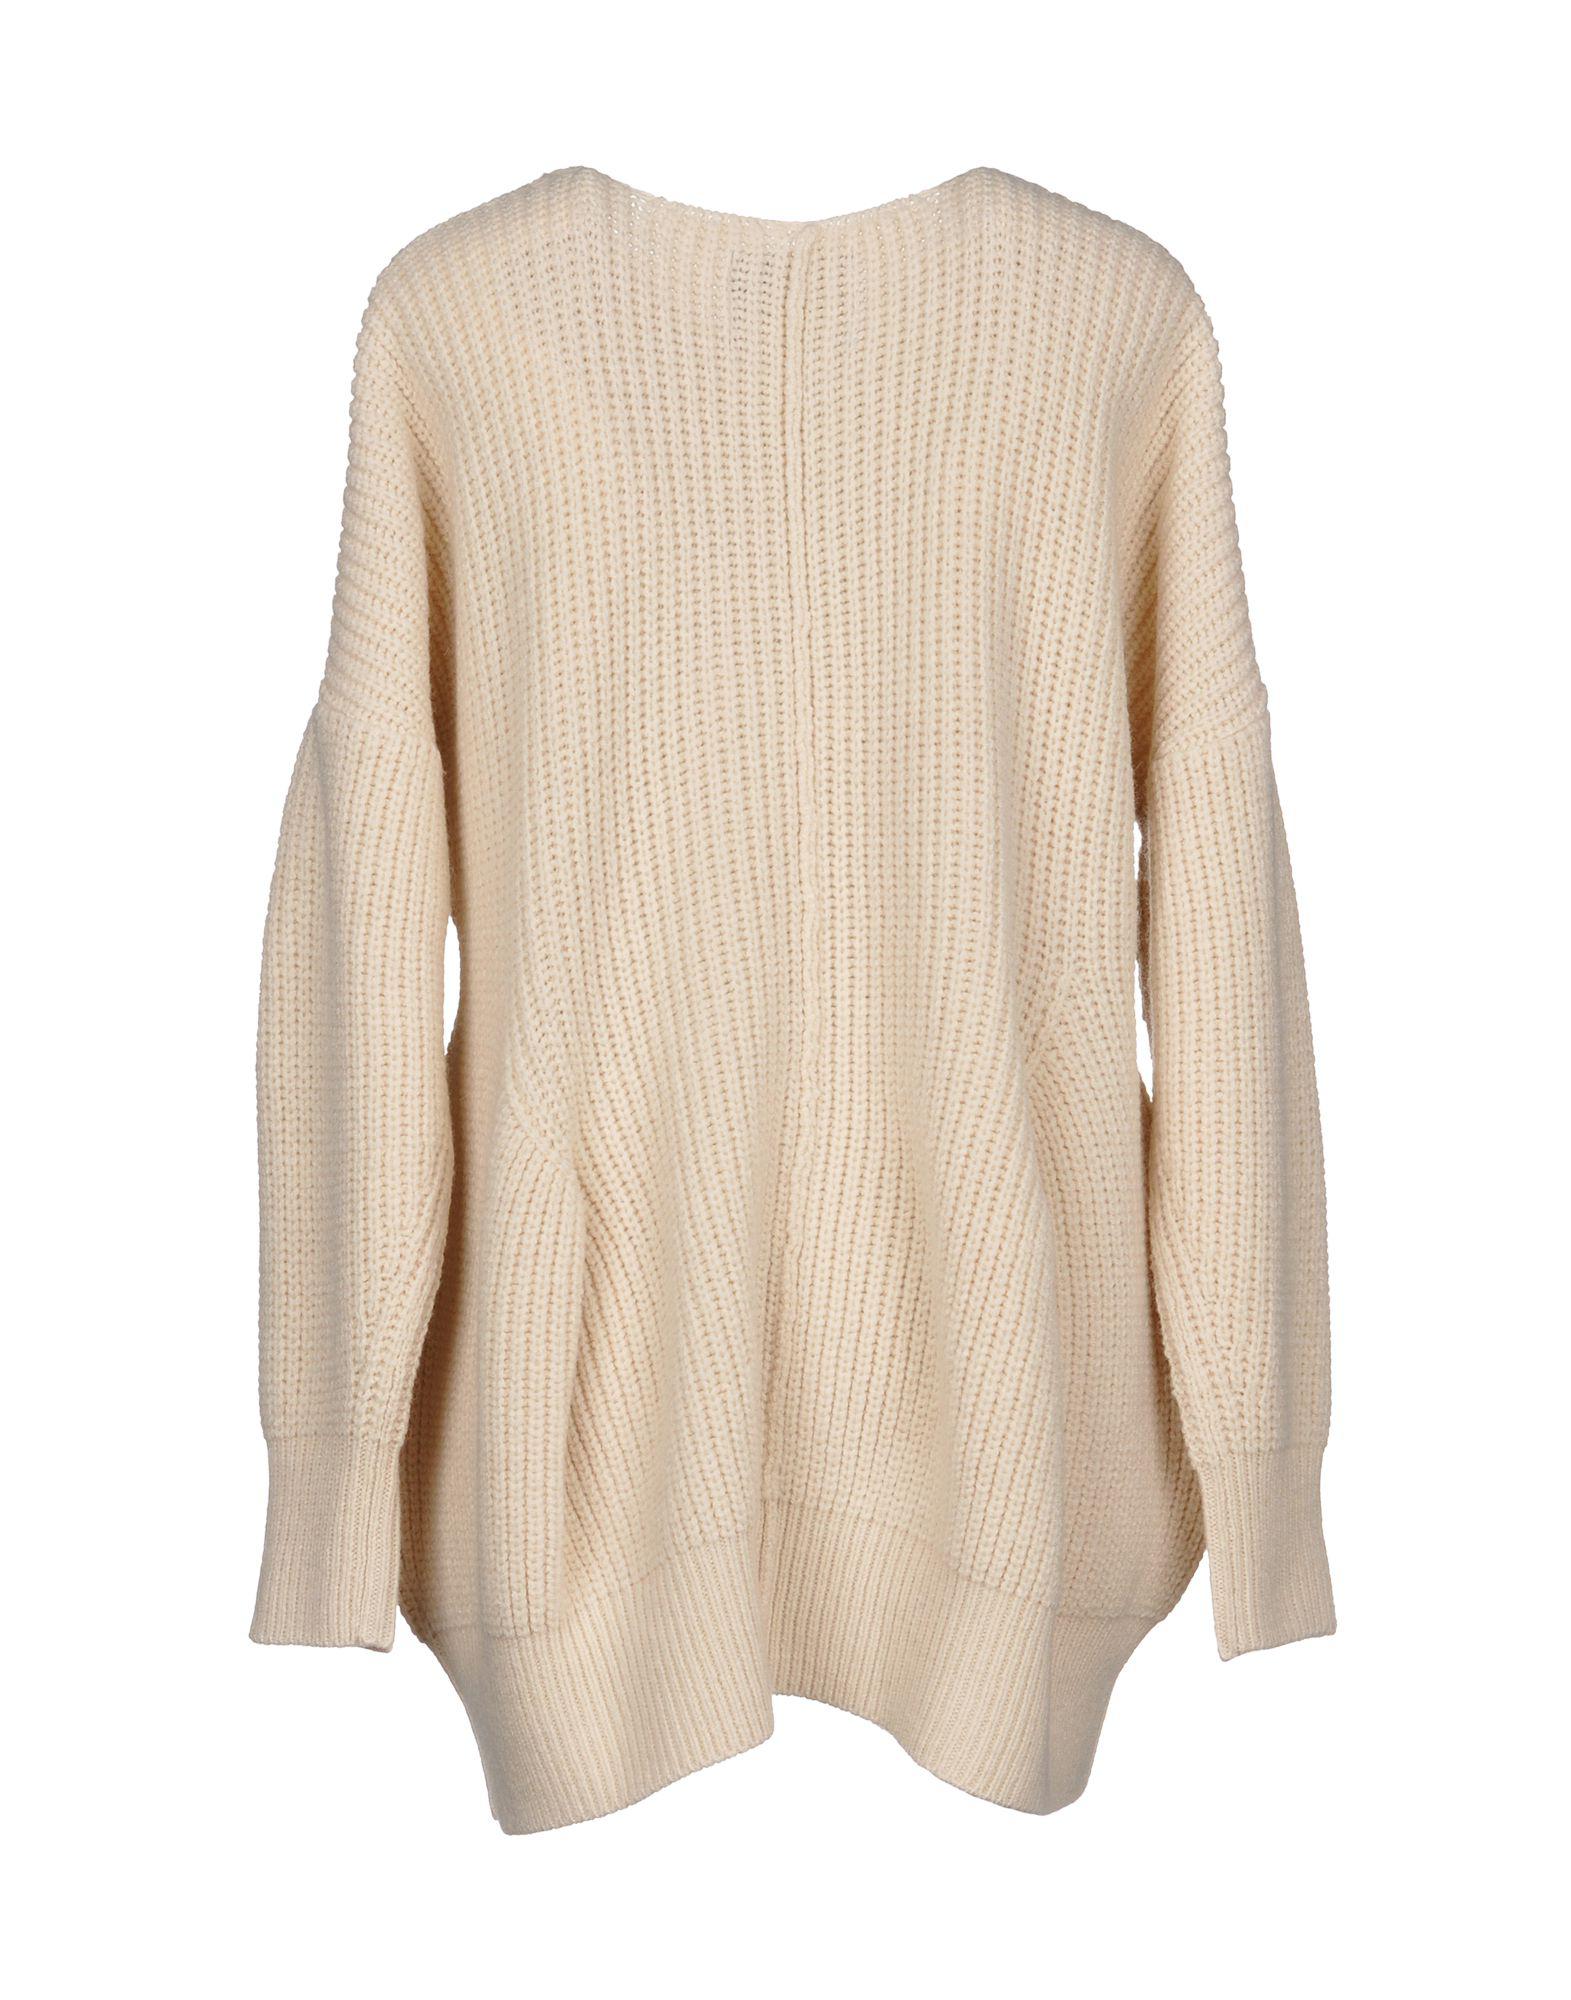 Ottod'Ame Wool Sweater in Ivory (White) - Lyst